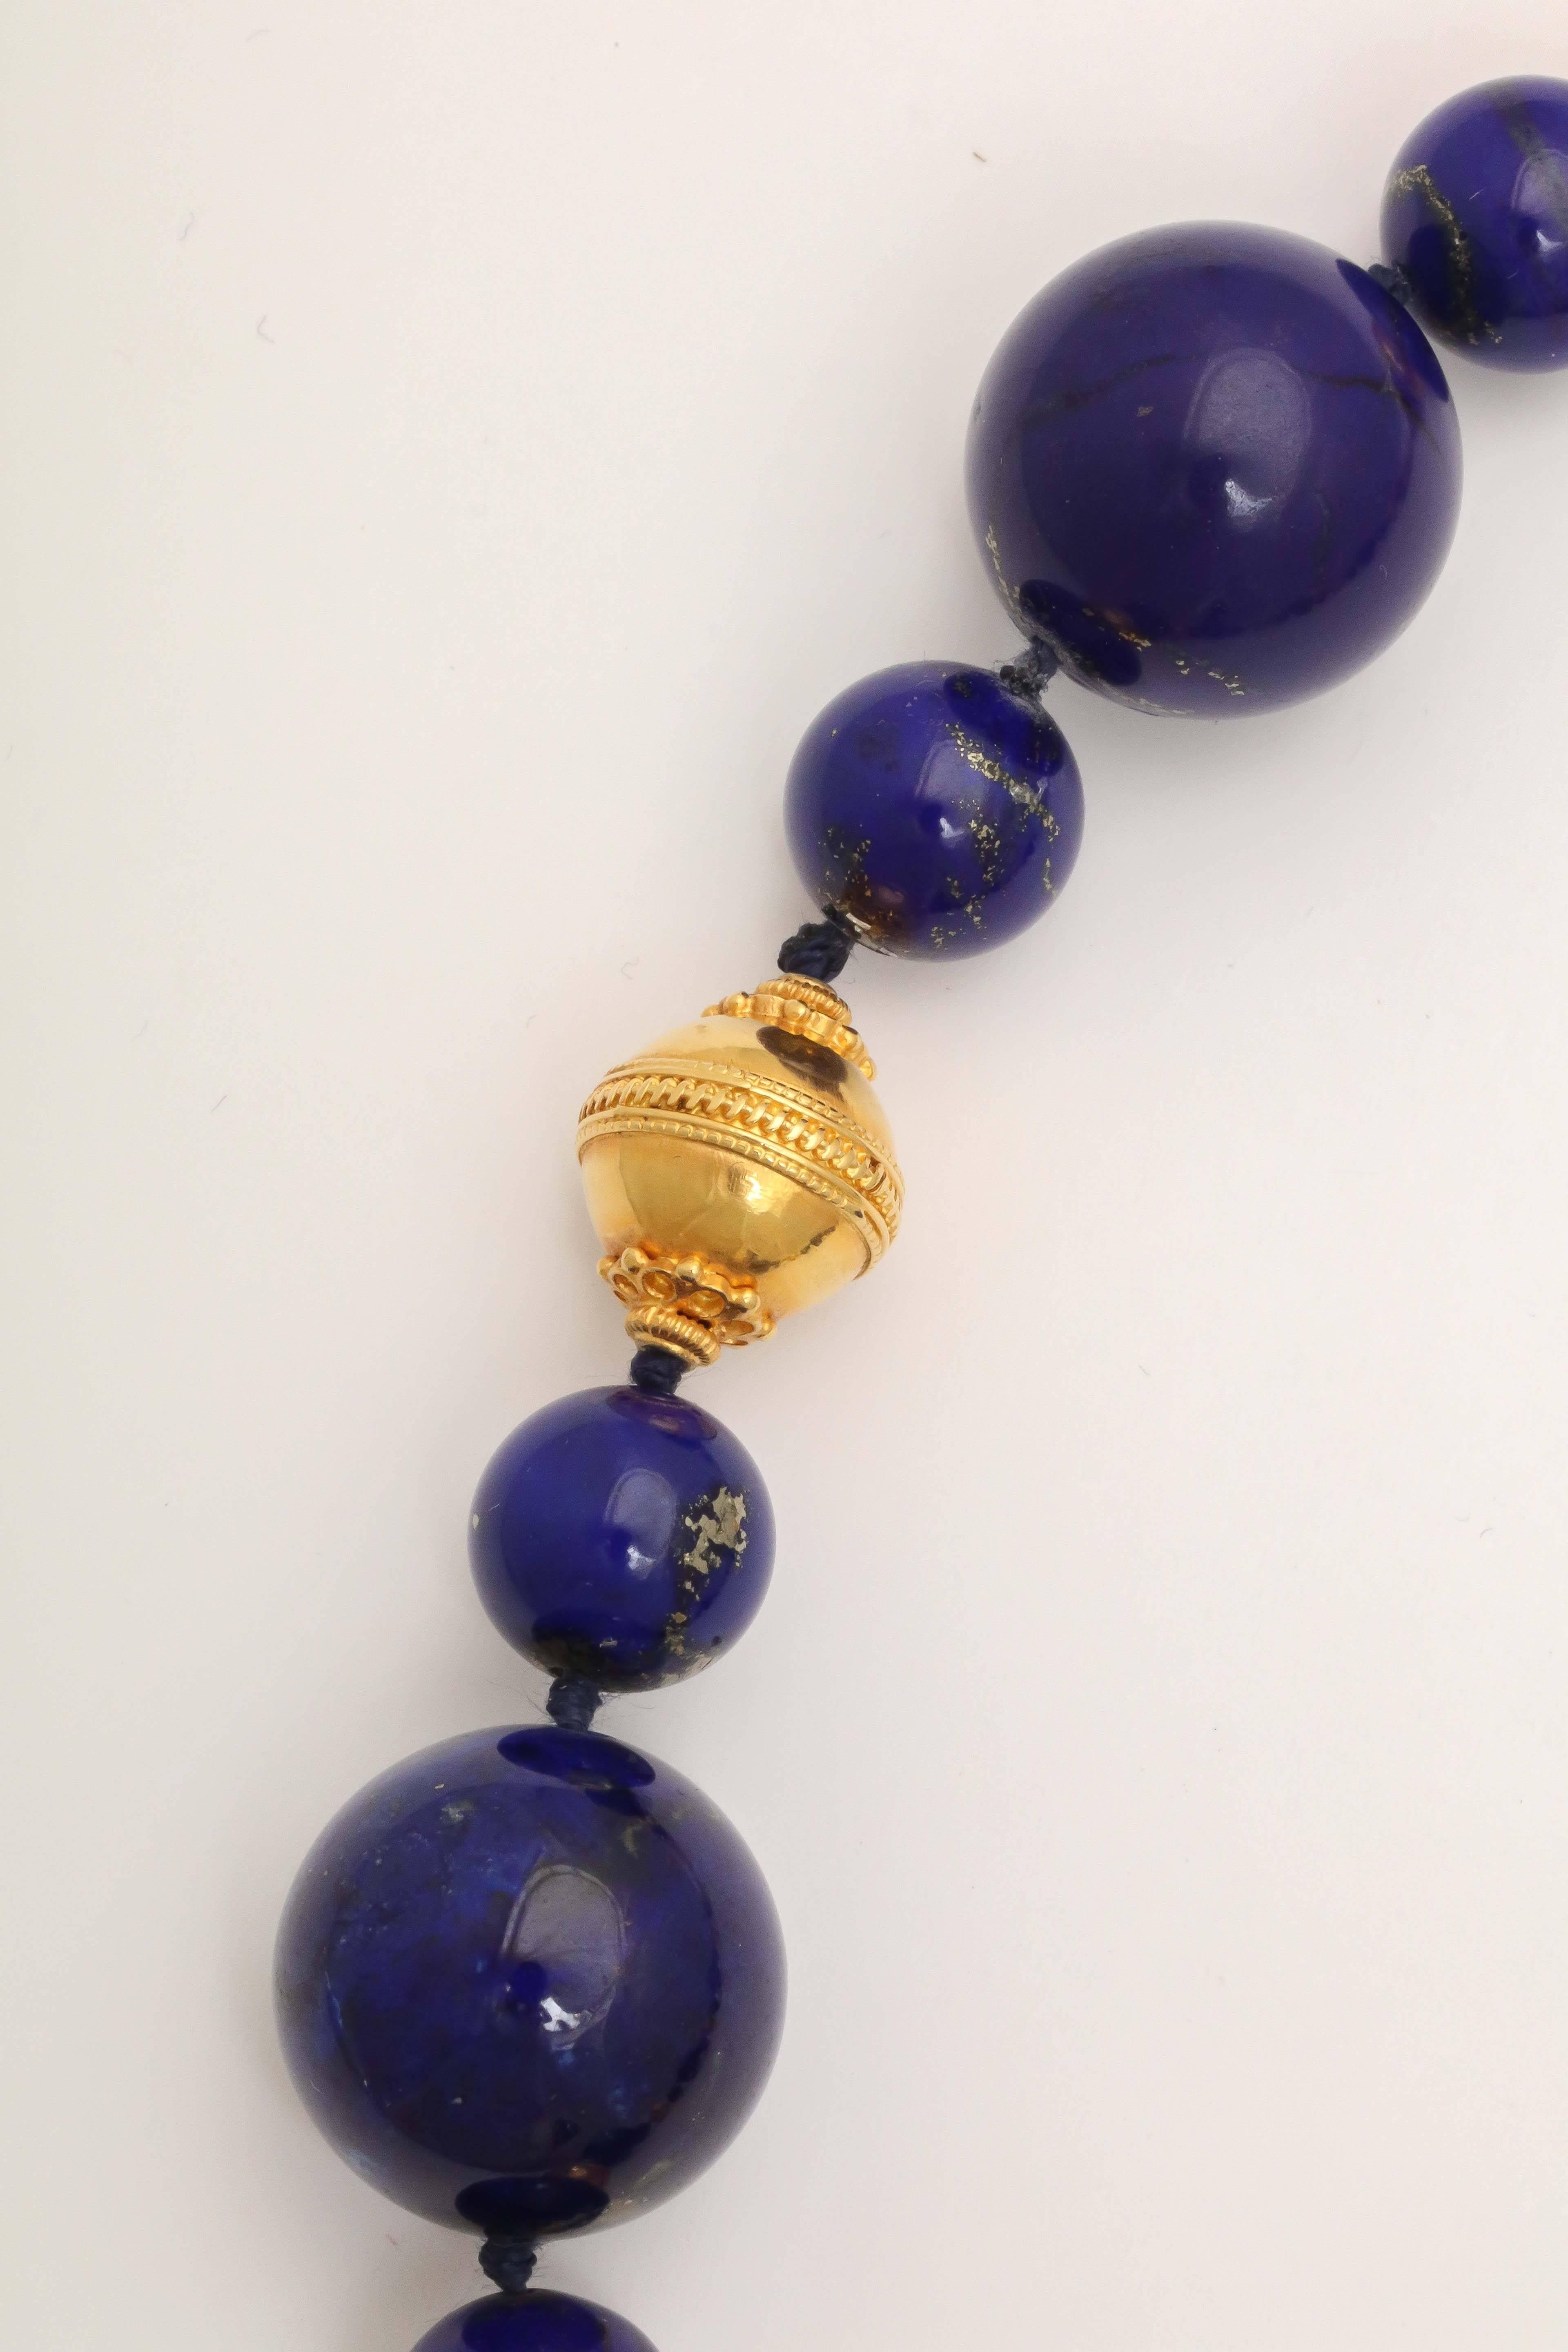 Hellenistic Russian Lapis Gold Bead Necklace